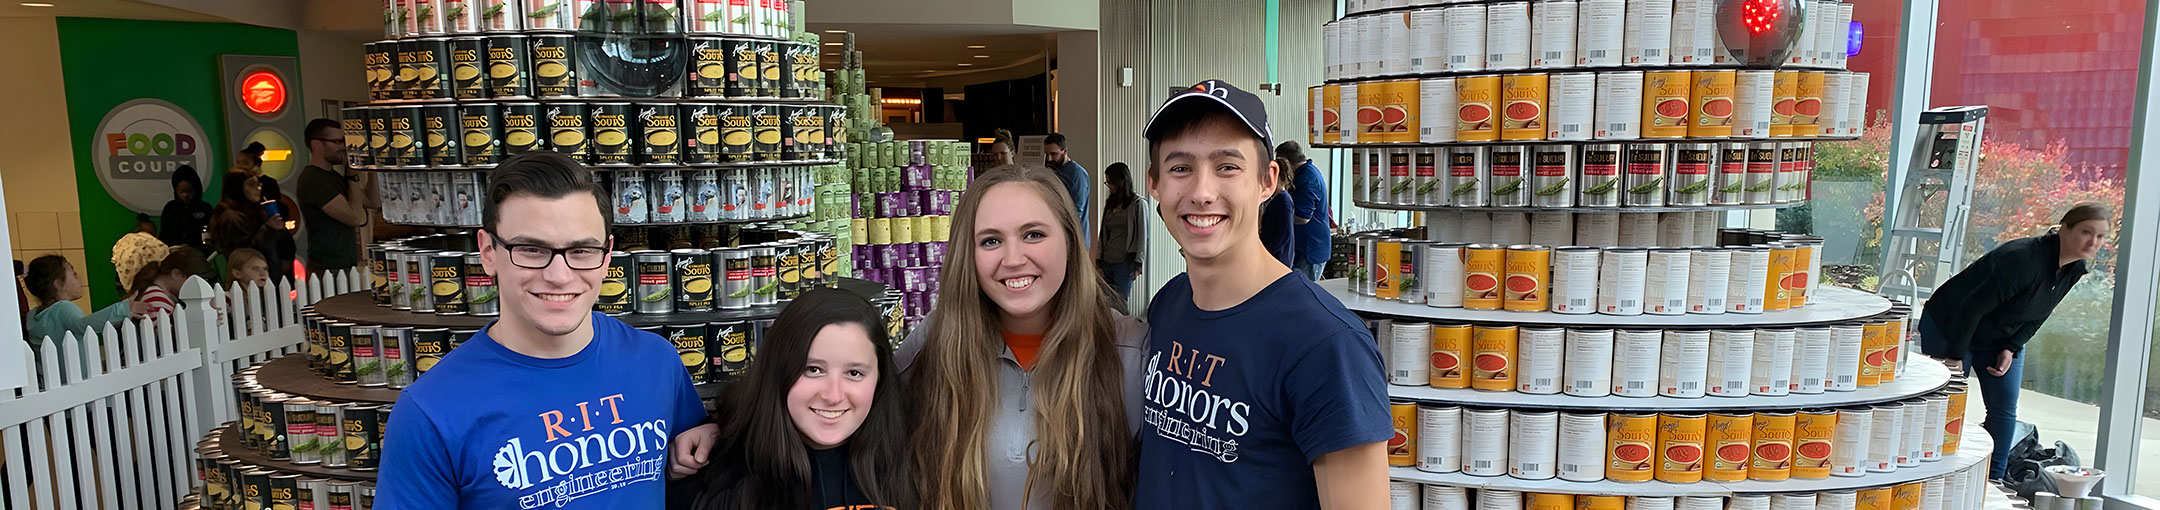 image of four Honors students at a service event